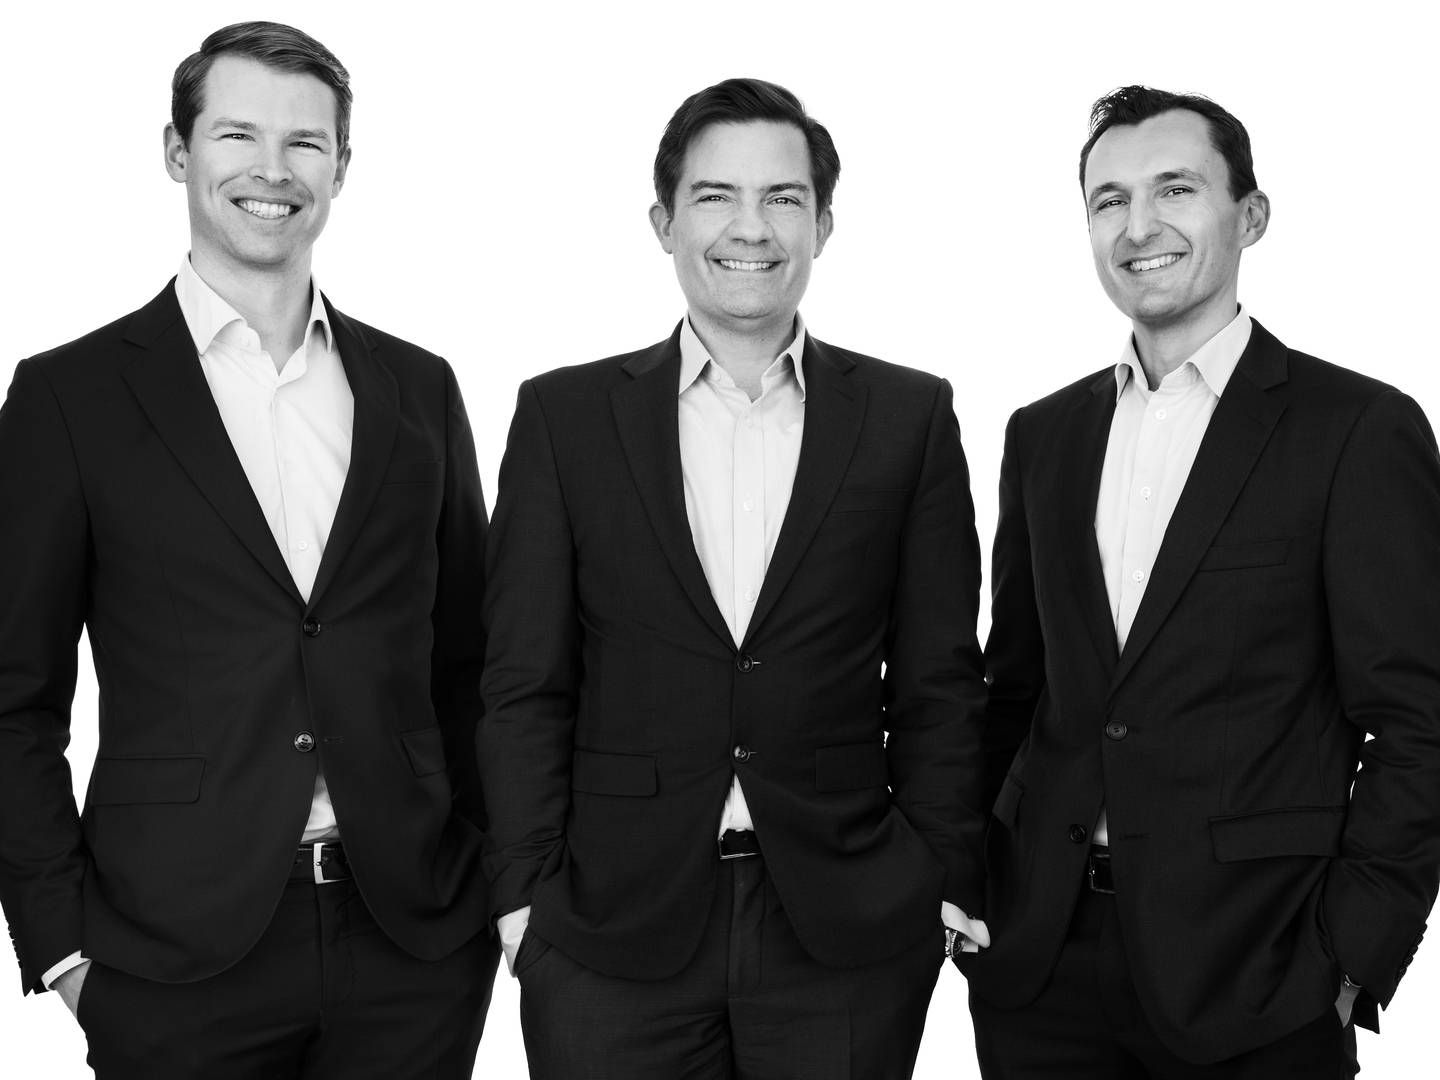 Christen Estrup, Julien Marencic and Alexander Reventlow announcing the start of Jera Capital two months after leaving Nordea AM was a very popular people story in 2022. | Photo: PR / Jera Capital